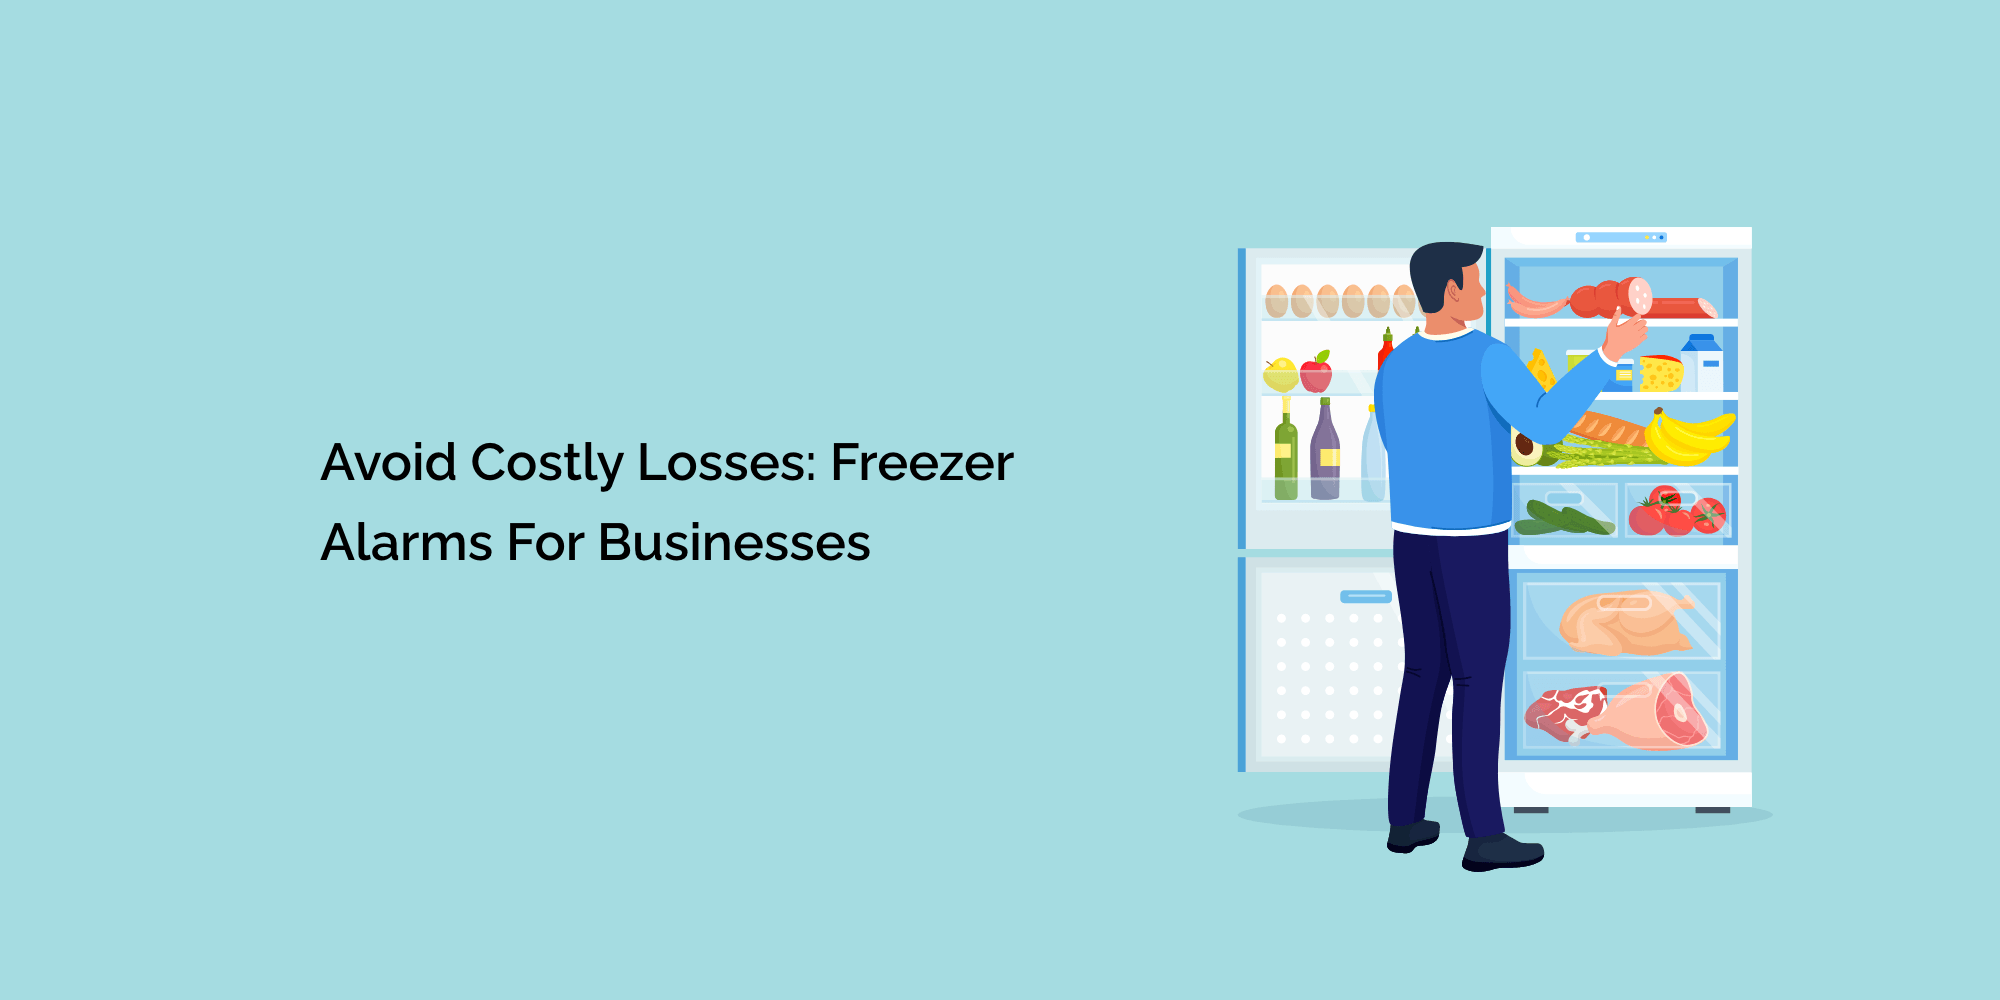 Avoid Costly Losses: Freezer Alarms for Businesses